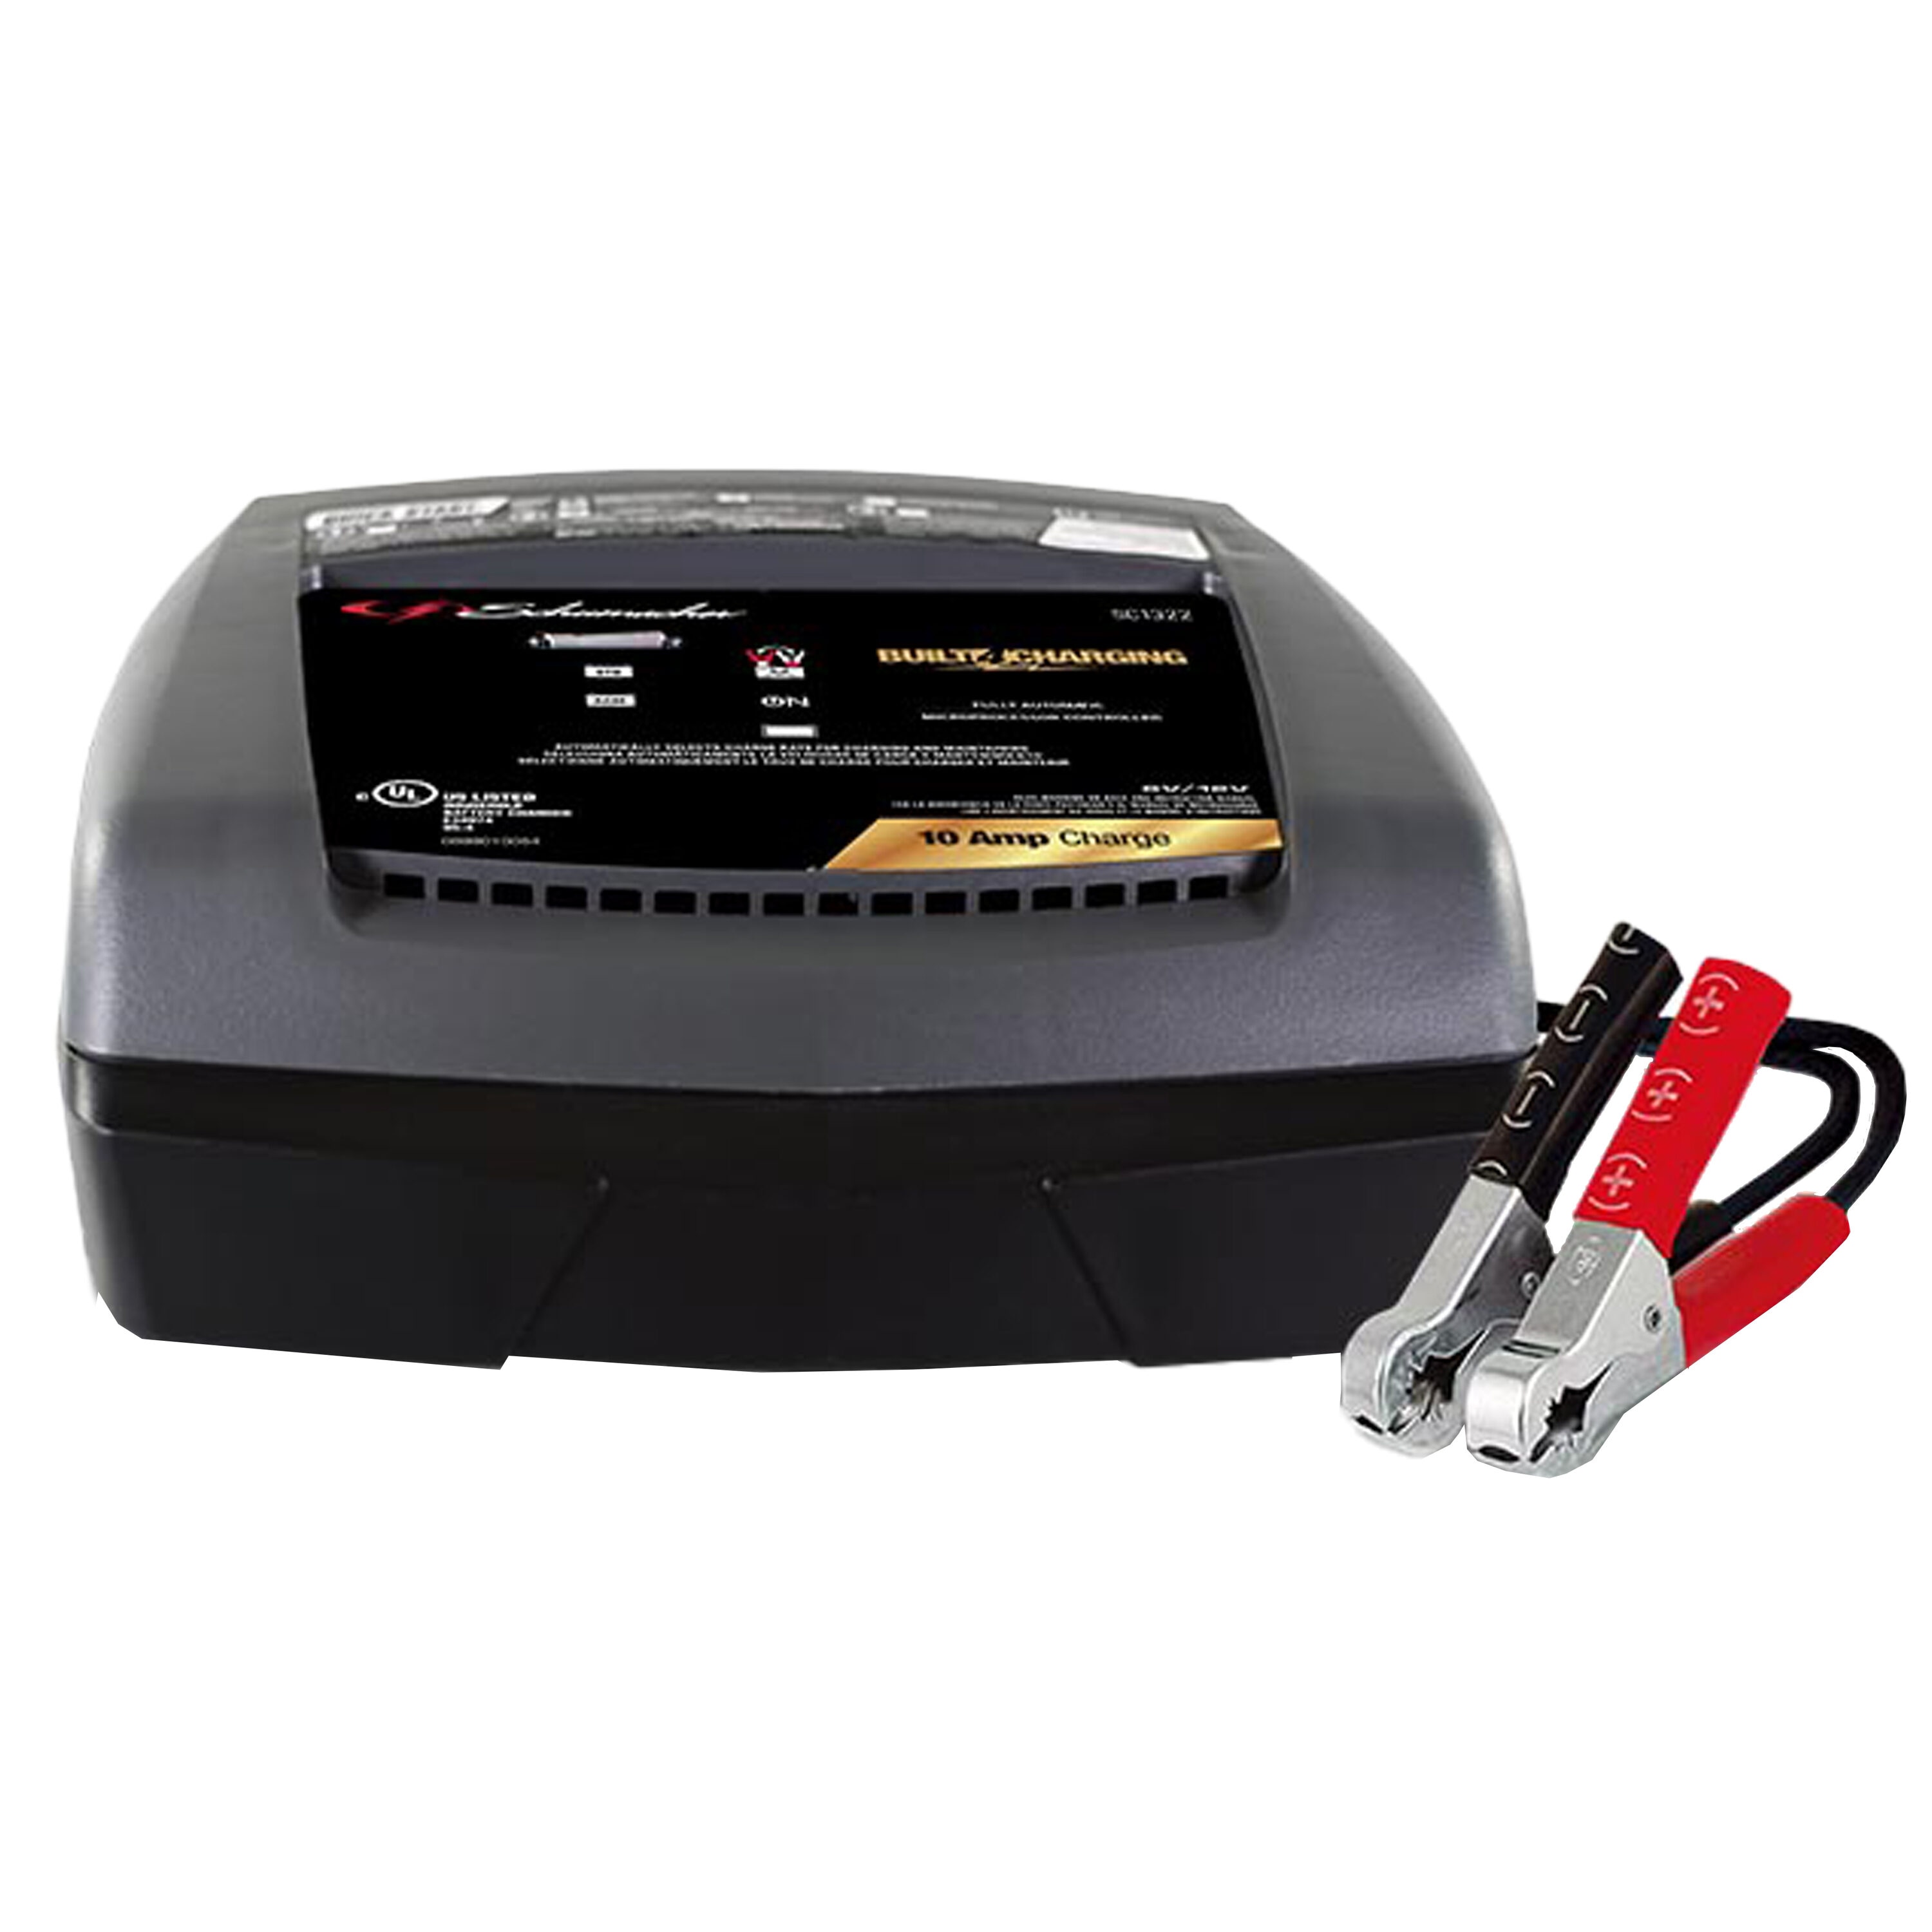 Schumacher SC1322 6V/12V Handheld Fully Automatic Battery Charger and 10A Maintainer